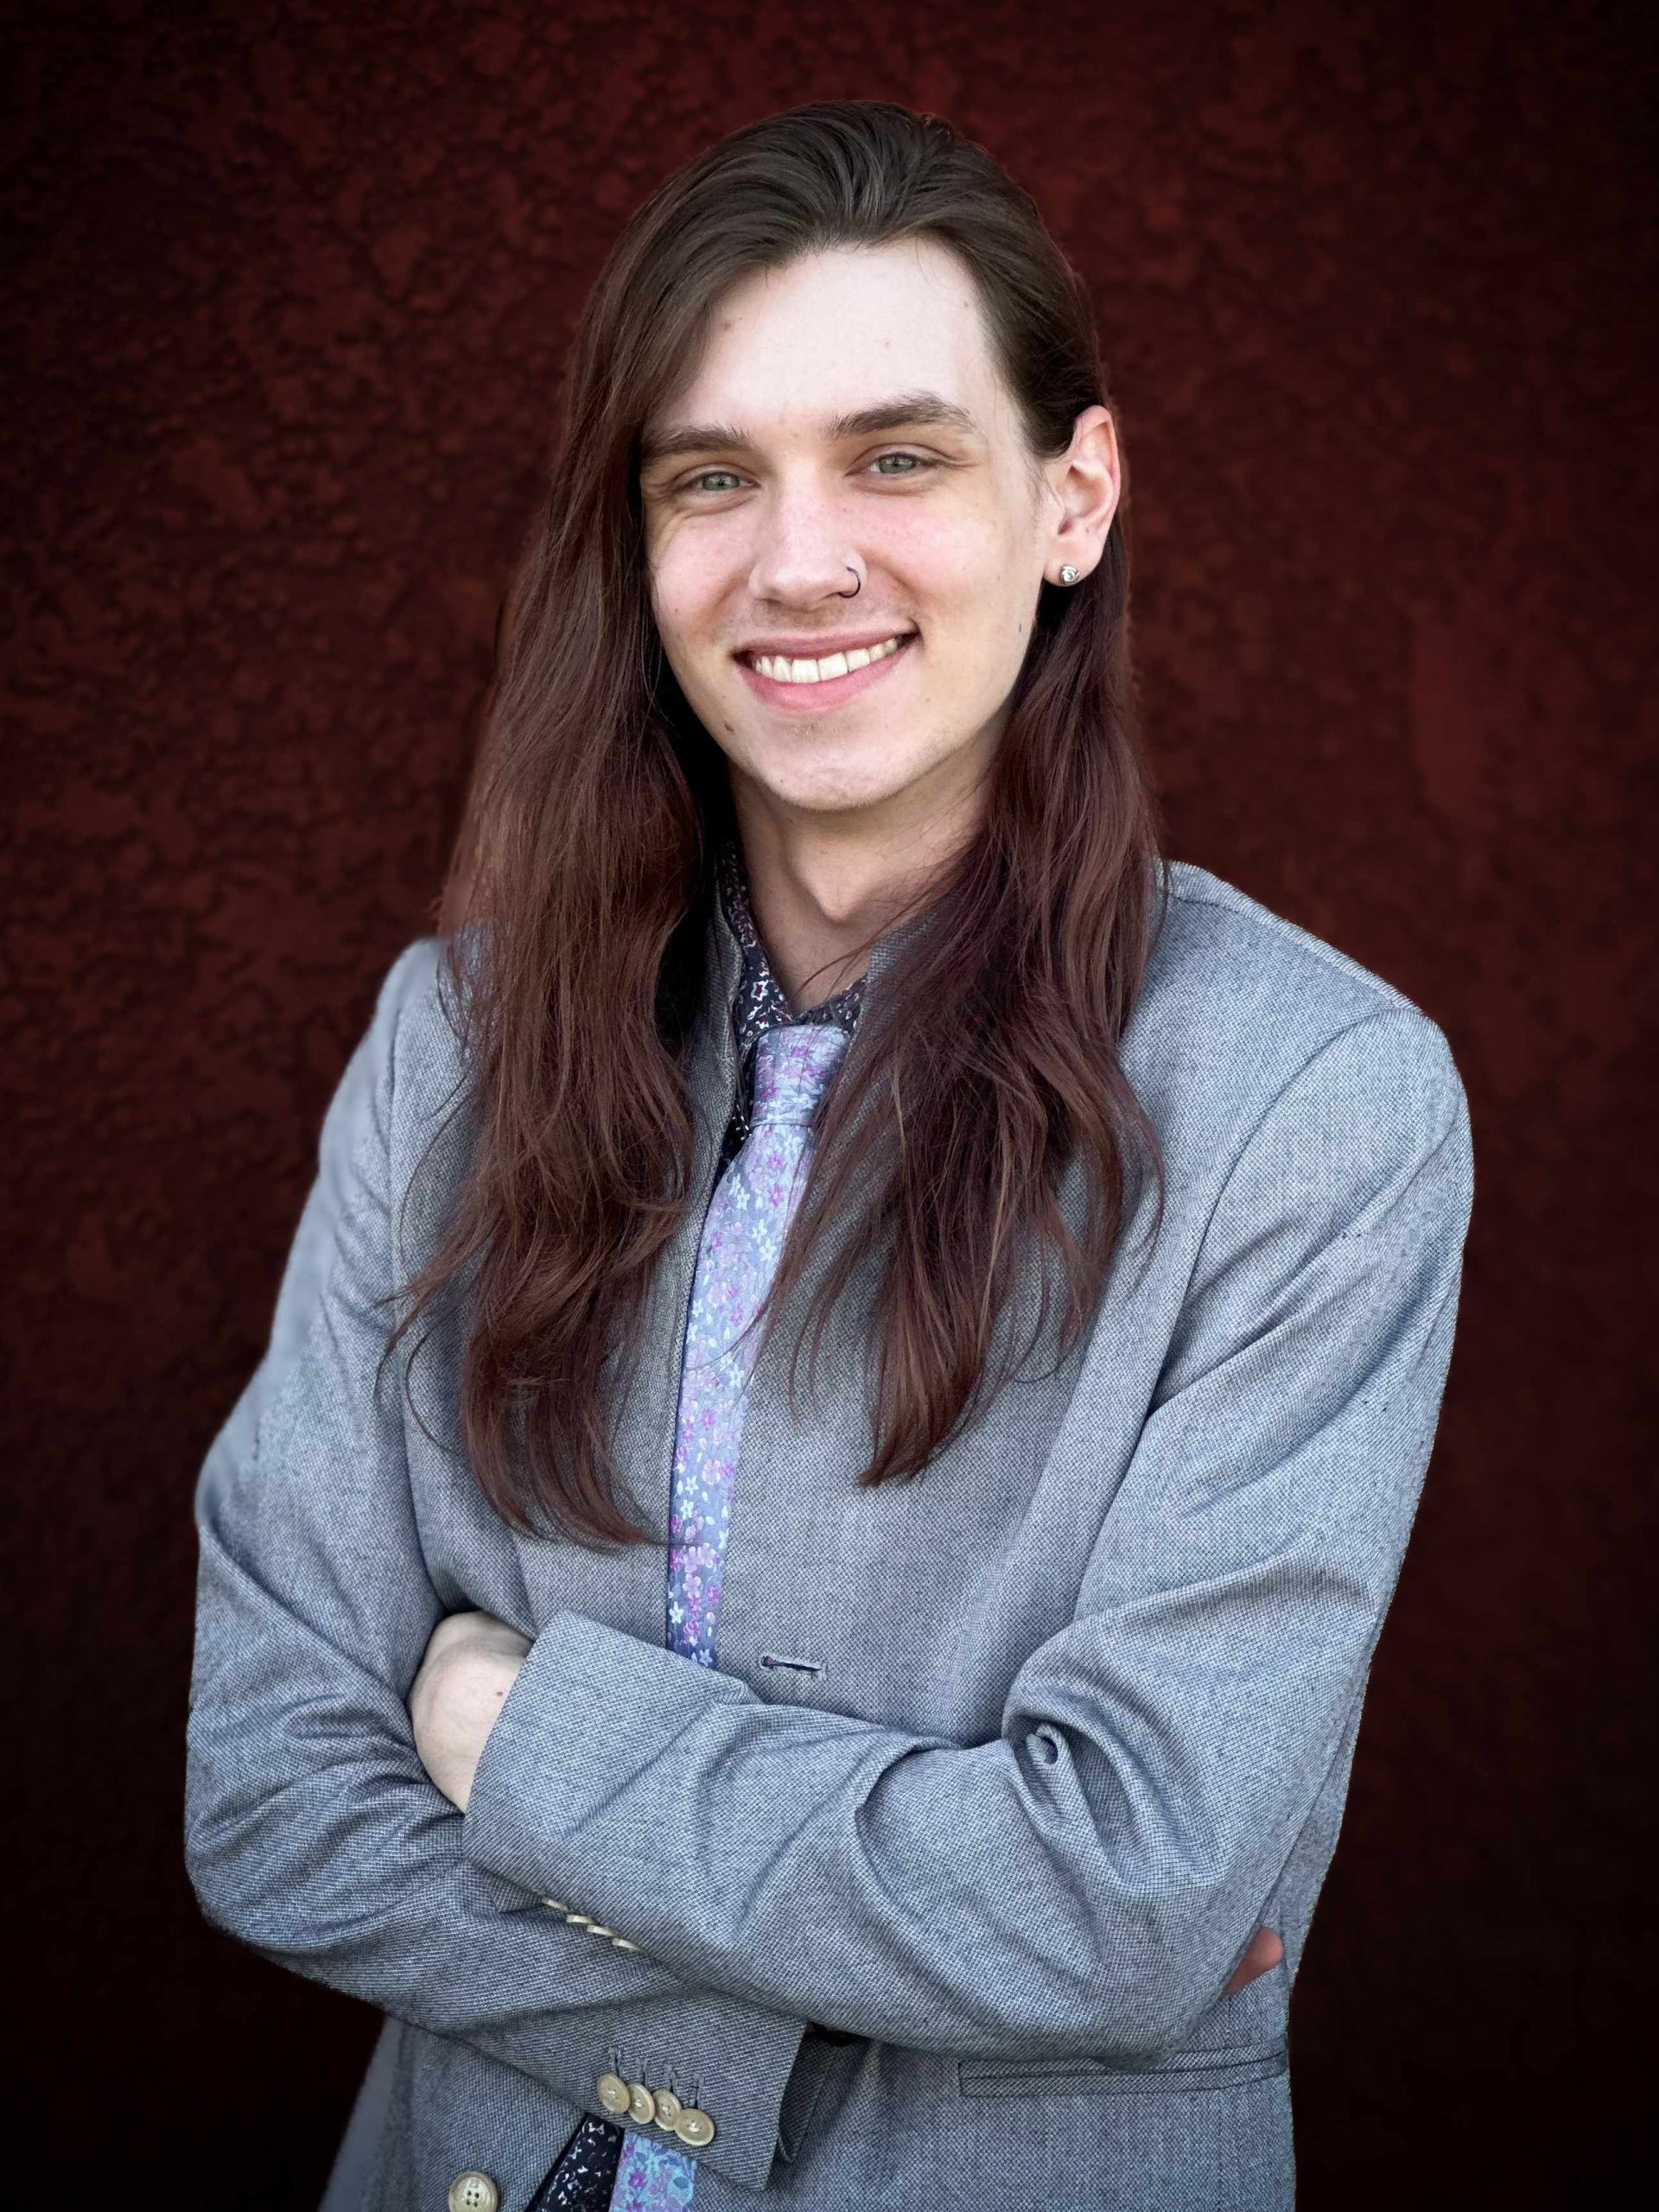 Photo of Lane. He has long hair and is against a red wall.